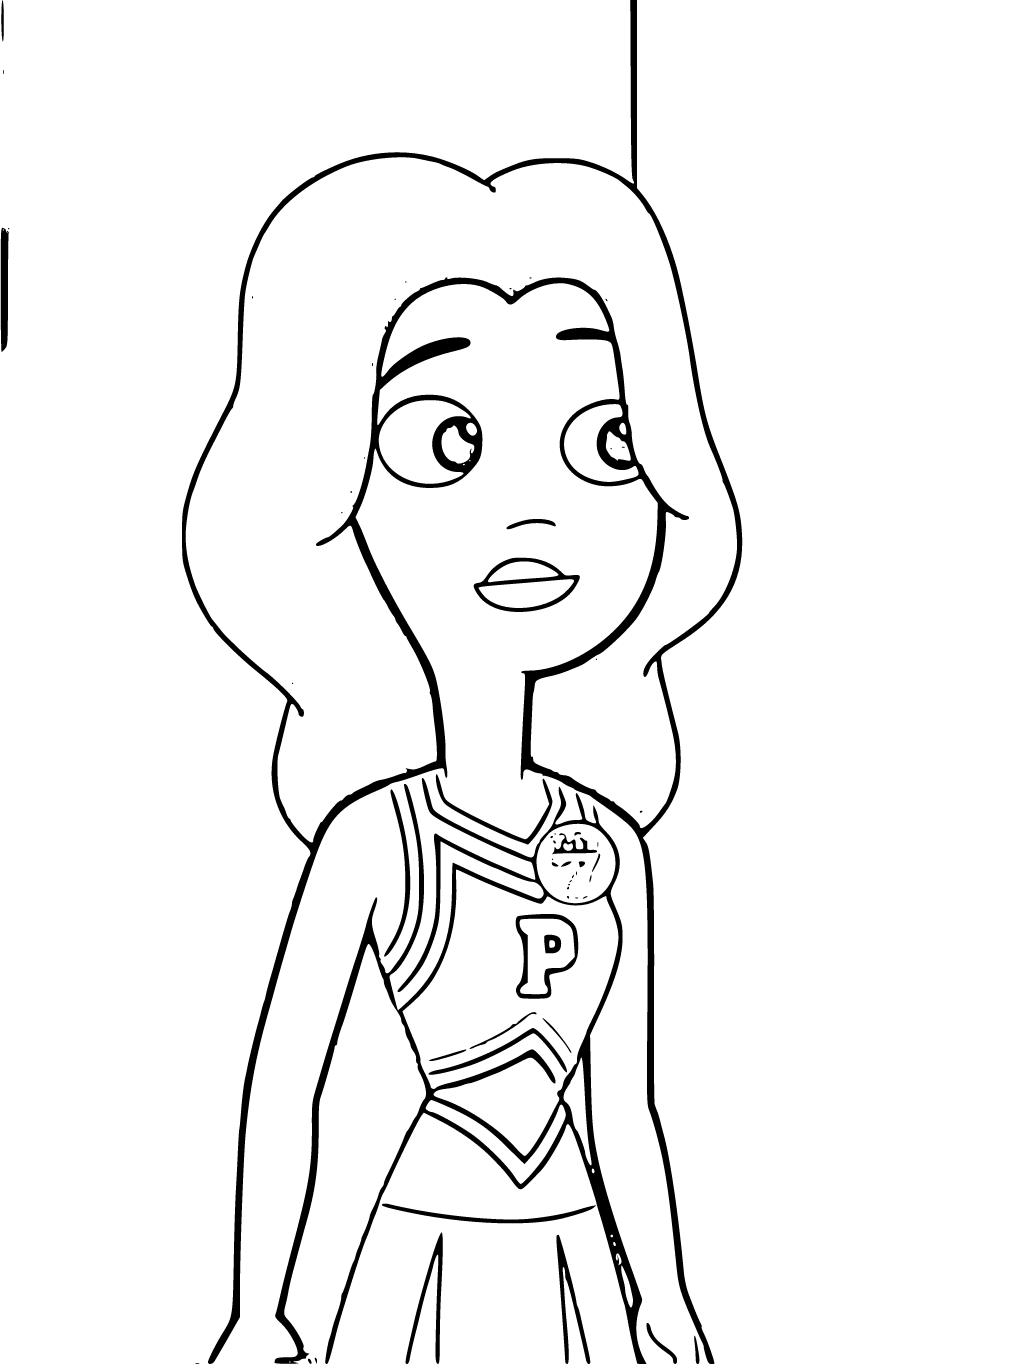 Cheerleader Fred: Hamster and GreteL Coloring Page printable - SheetalColor.com